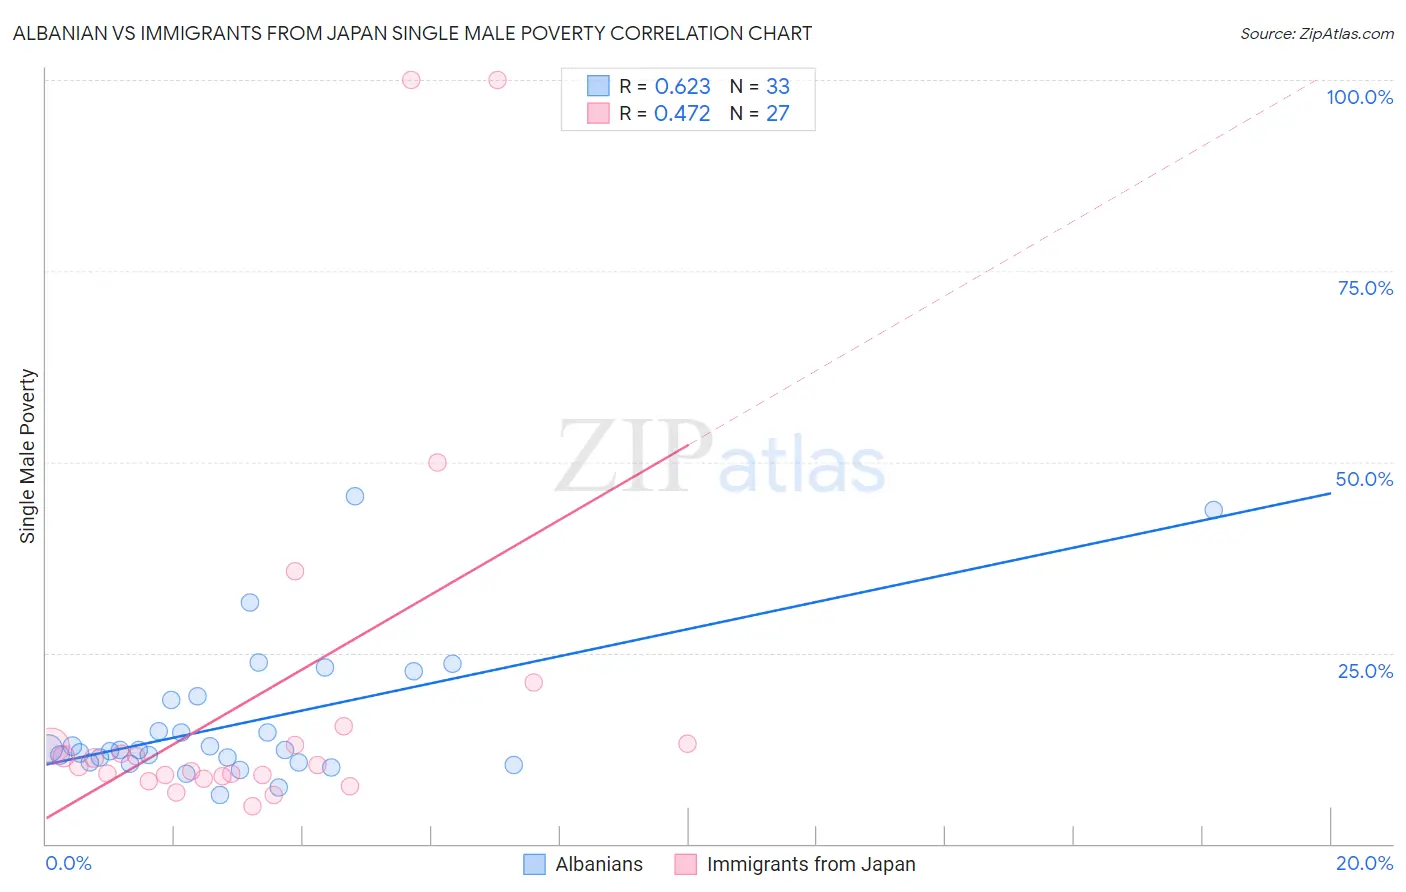 Albanian vs Immigrants from Japan Single Male Poverty